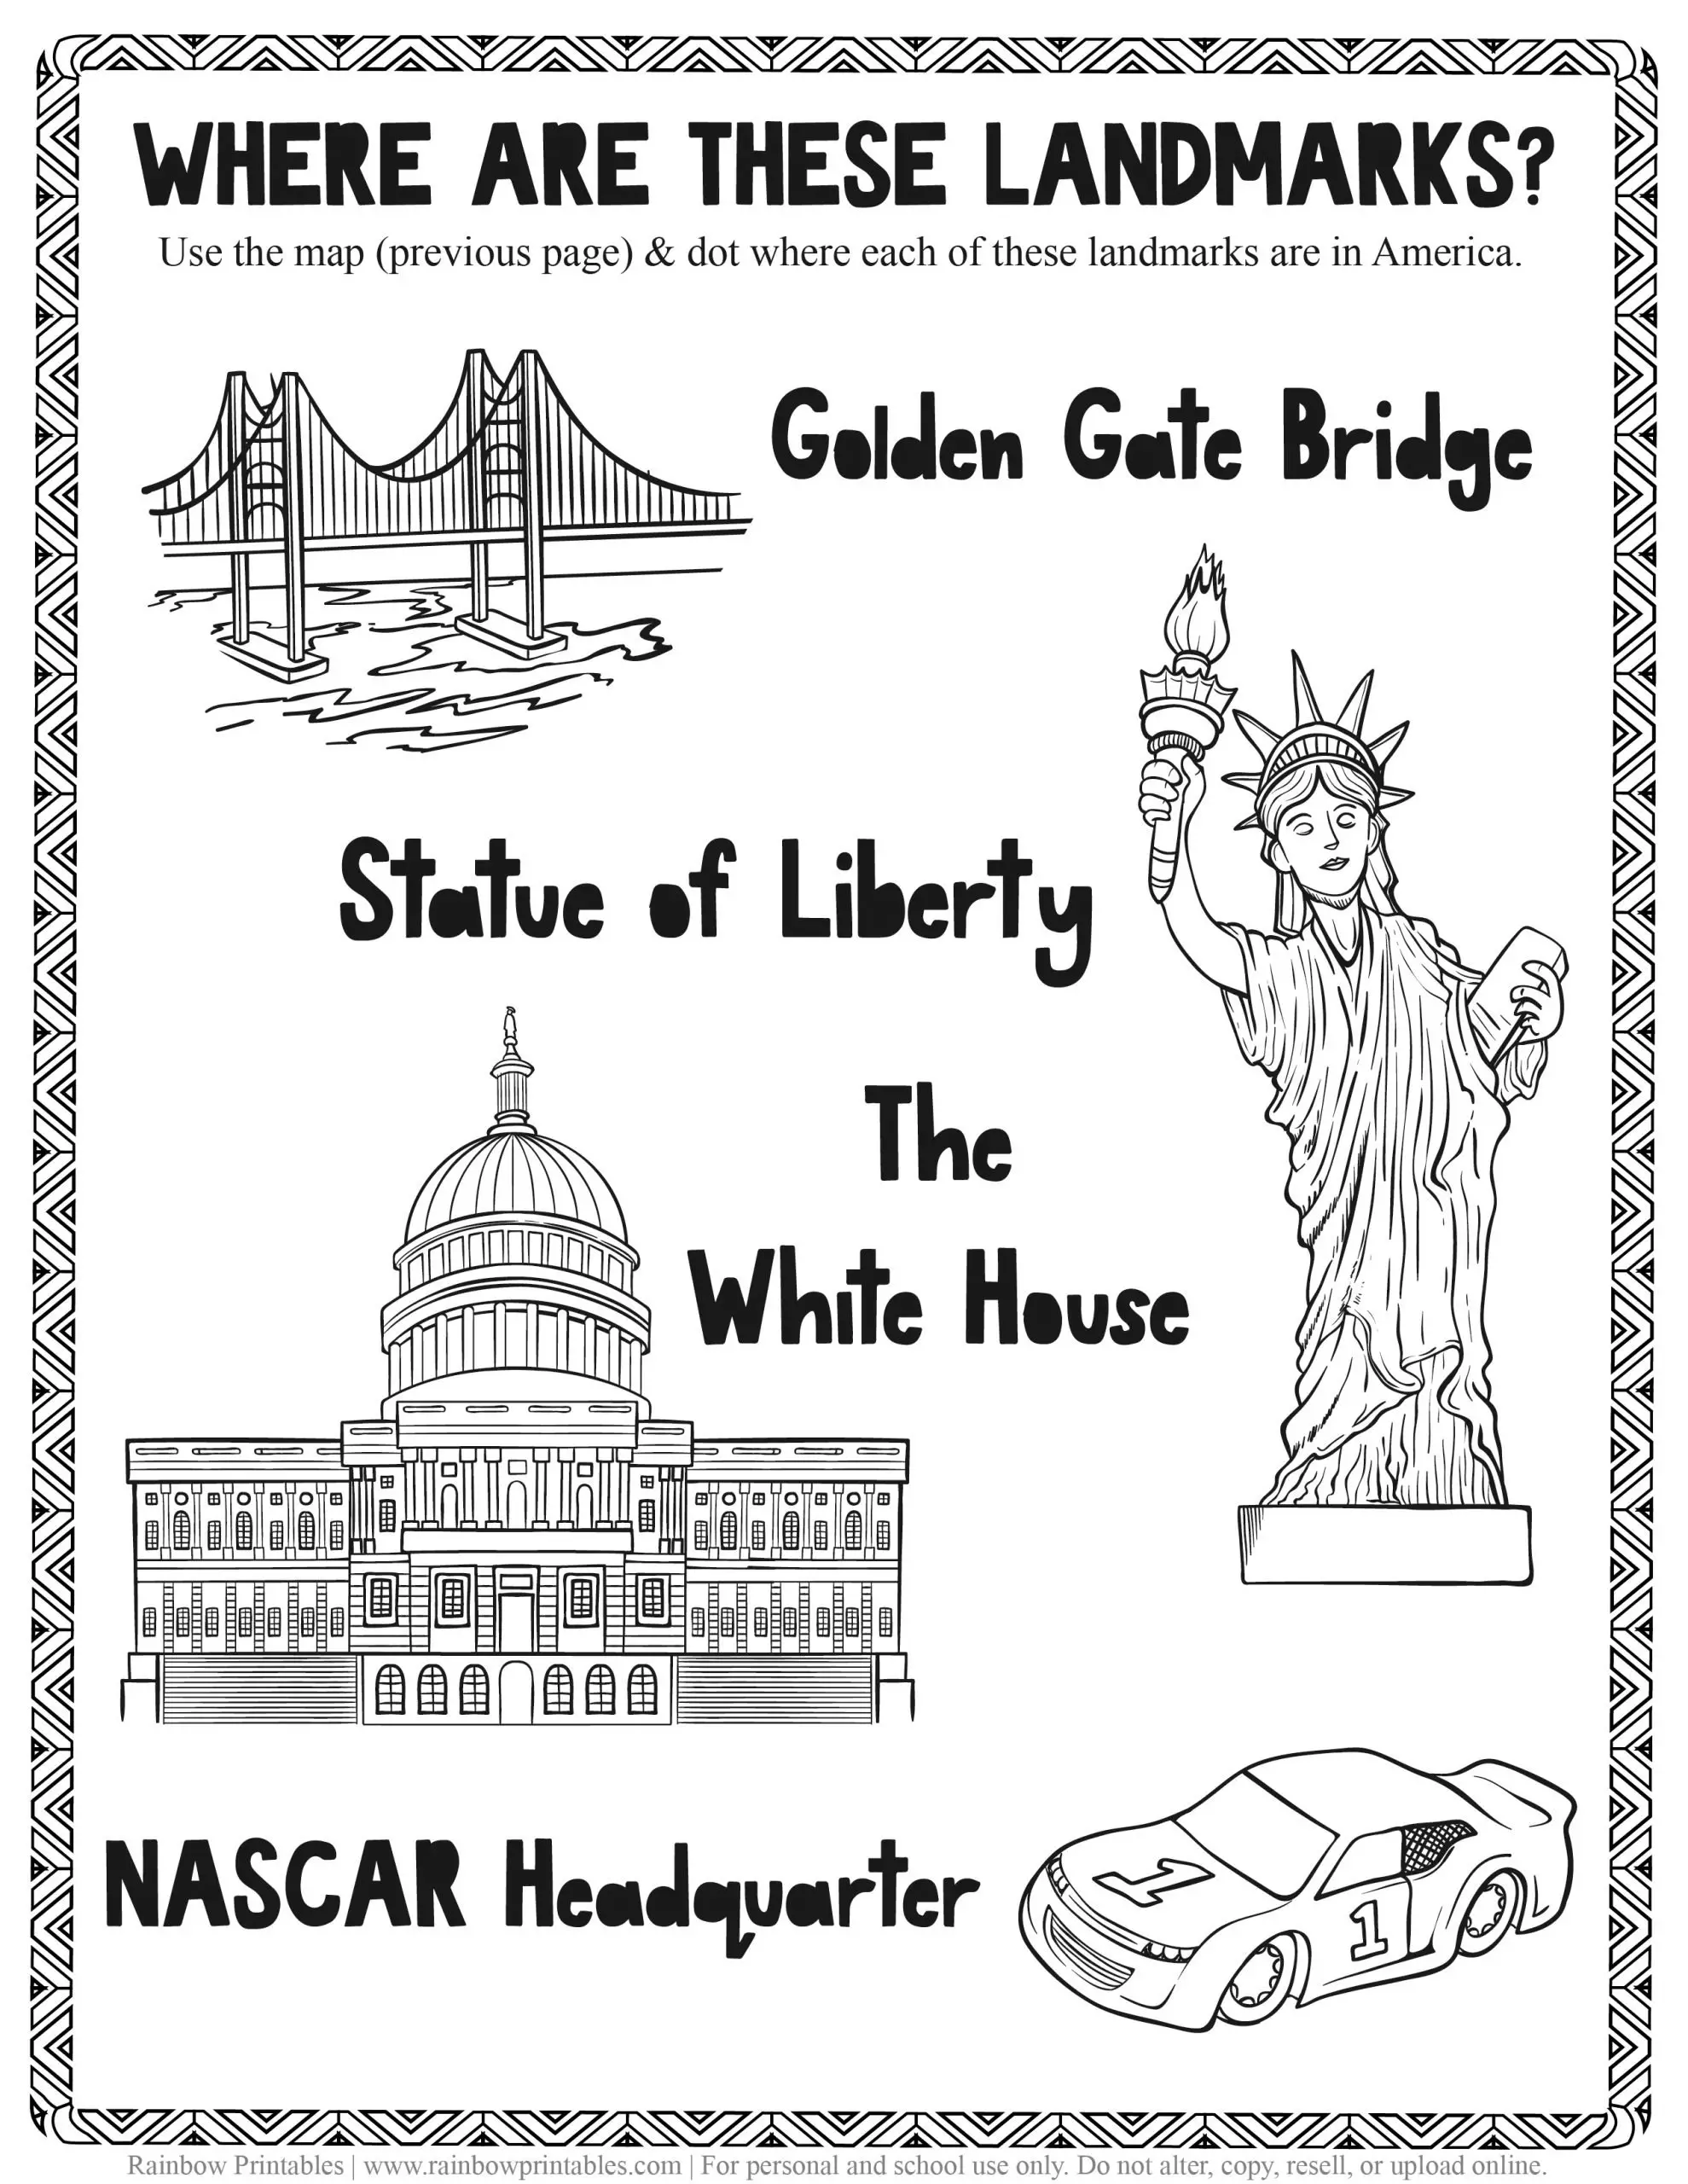 American Famous Landmarks Worksheet Geography Quiz Kids Patriotic July 4th independence Day Printables for Children, Toddlers, America Coloring Pages, Activity